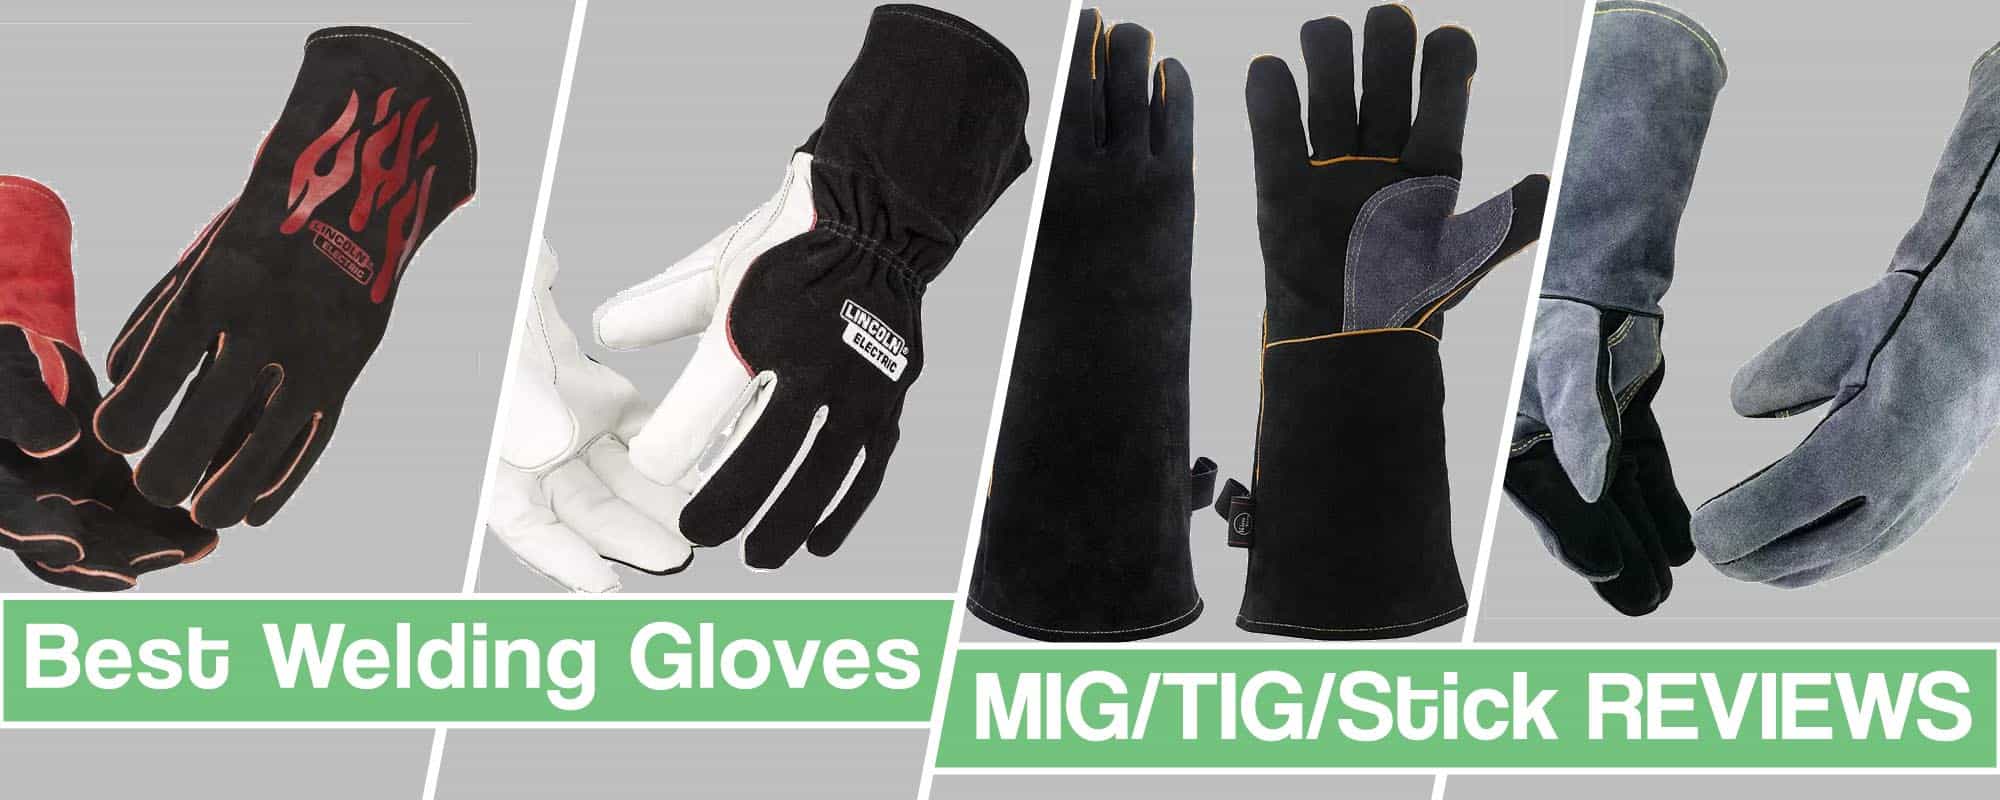 Feature image for Best Welding Gloves review article